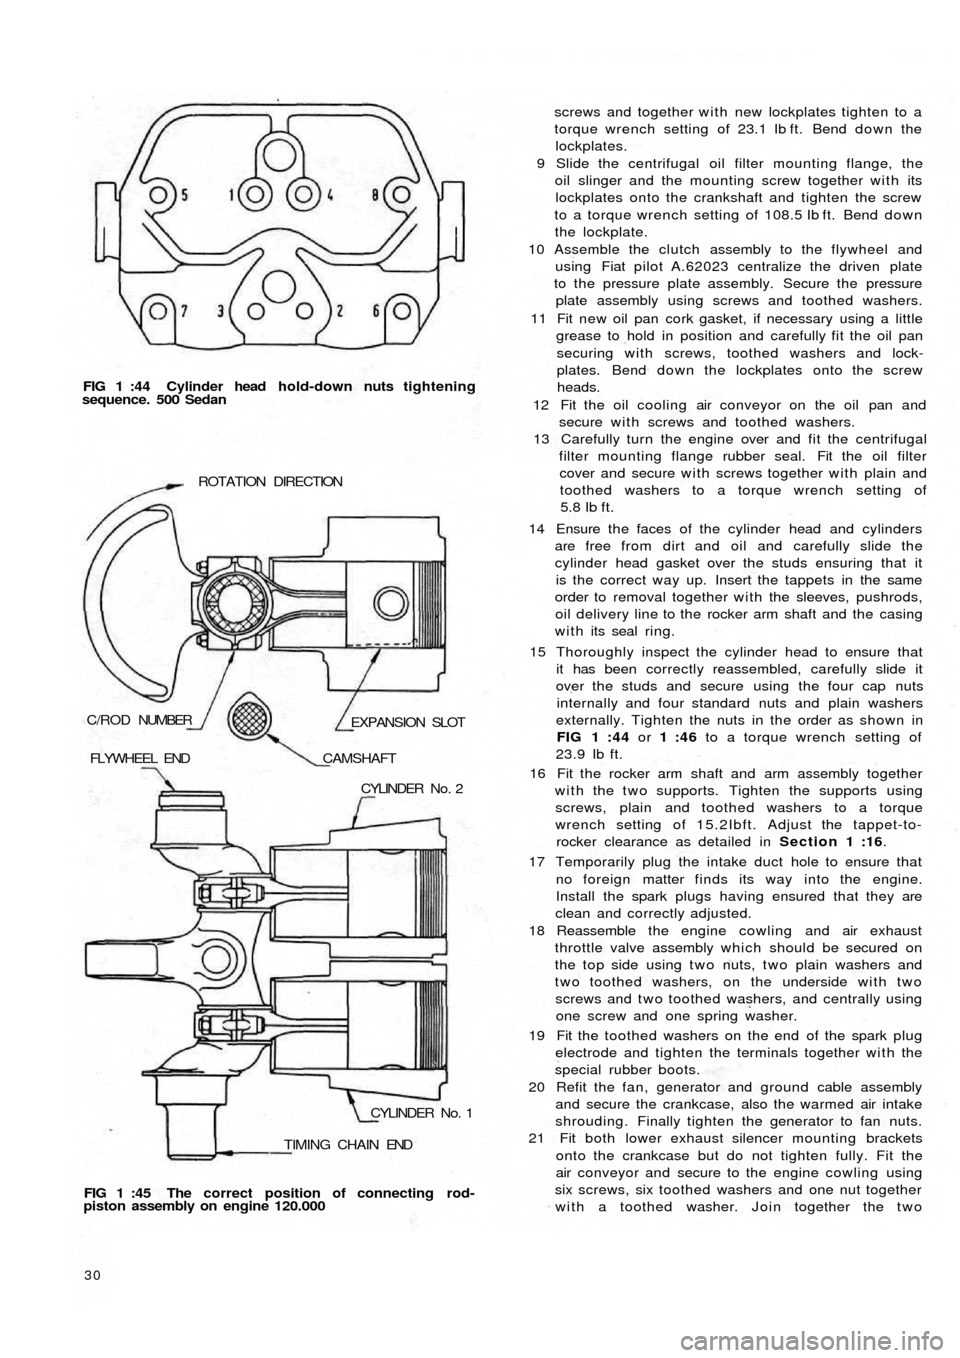 FIAT 500 1959 1.G Owners Manual FIG 1 :44  Cylinder head h o ld-down nuts tightening
sequence. 500 Sedan
TIMING  CHAIN  ENDCYLINDER  No.  1 CYLINDER  No.  2 FLYWHEEL  END
CAMSHAFT
EXPANSION  SLOT C/ROD NUMBERROTATION  DIRECTION
FIG 